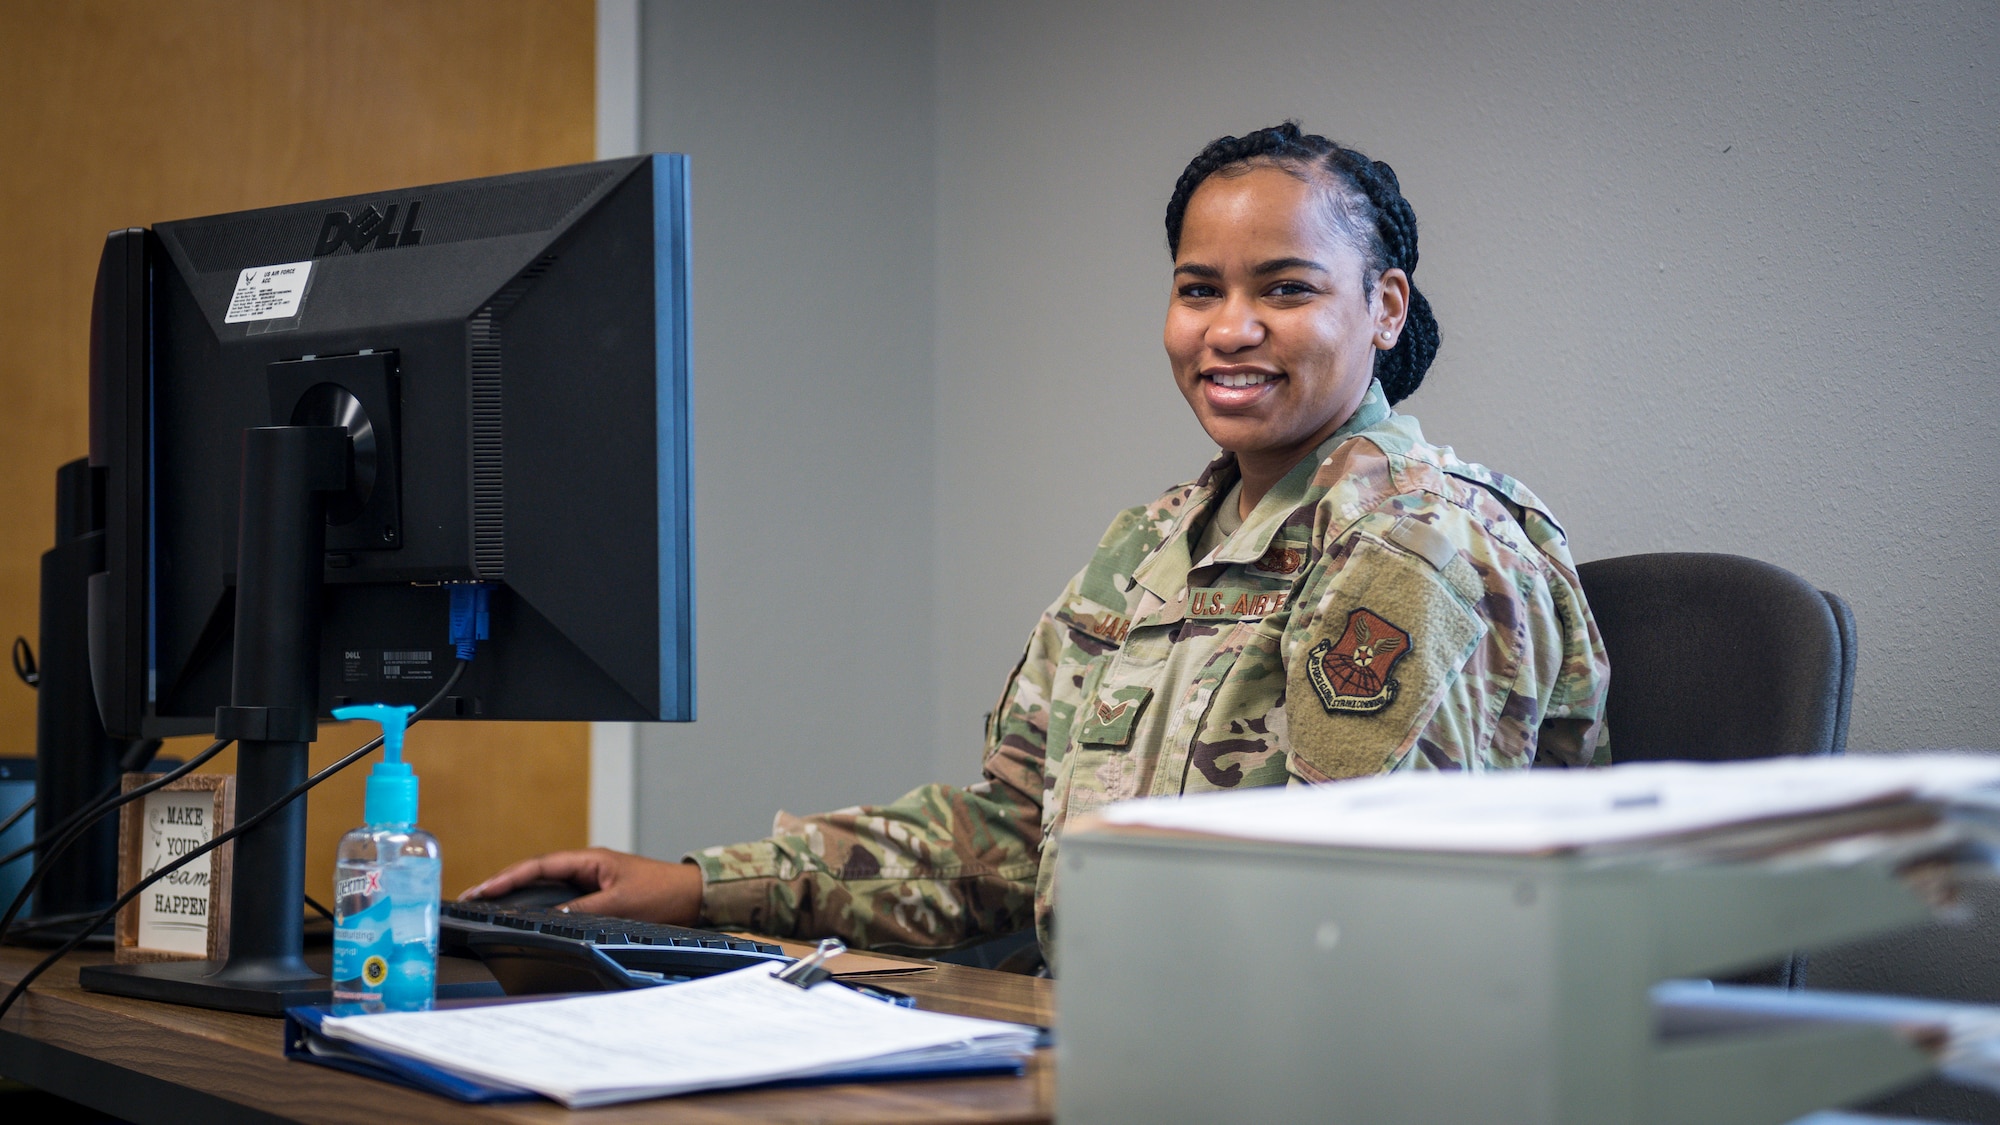 Senior Airman Destiny Jarvis, 2nd Logistics Readiness Squadron traffic management office personal property counselor, poses for a photo in the new River’s Edge Welcome Center at Barksdale Air Force Base, La., June 29, 2020.